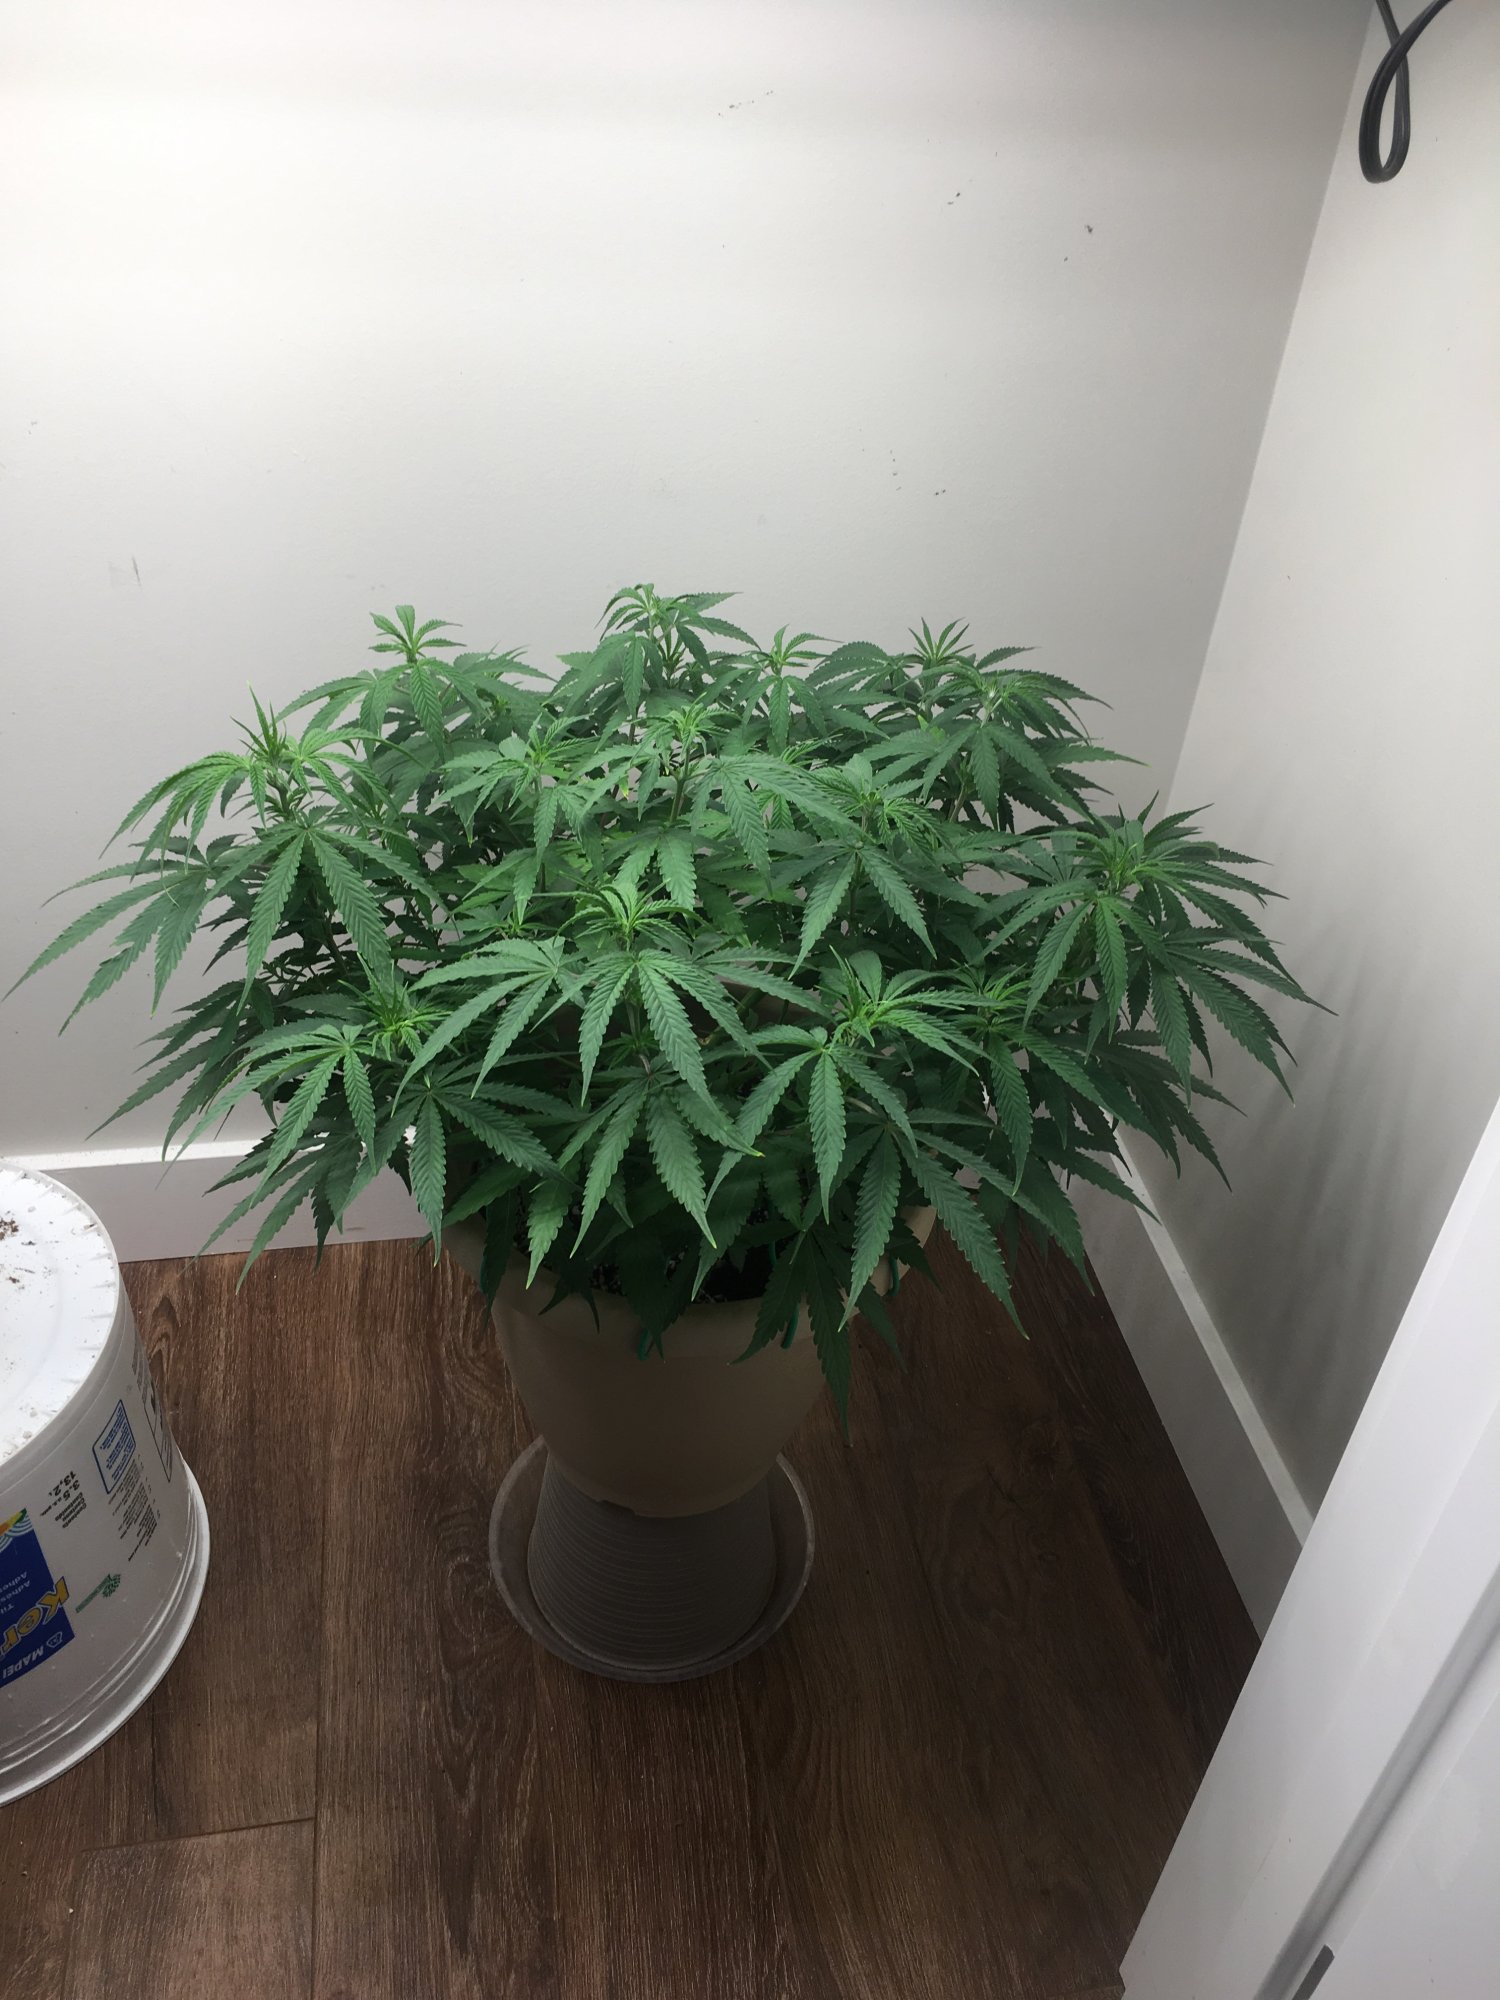 Need help with transplanting a plant 7